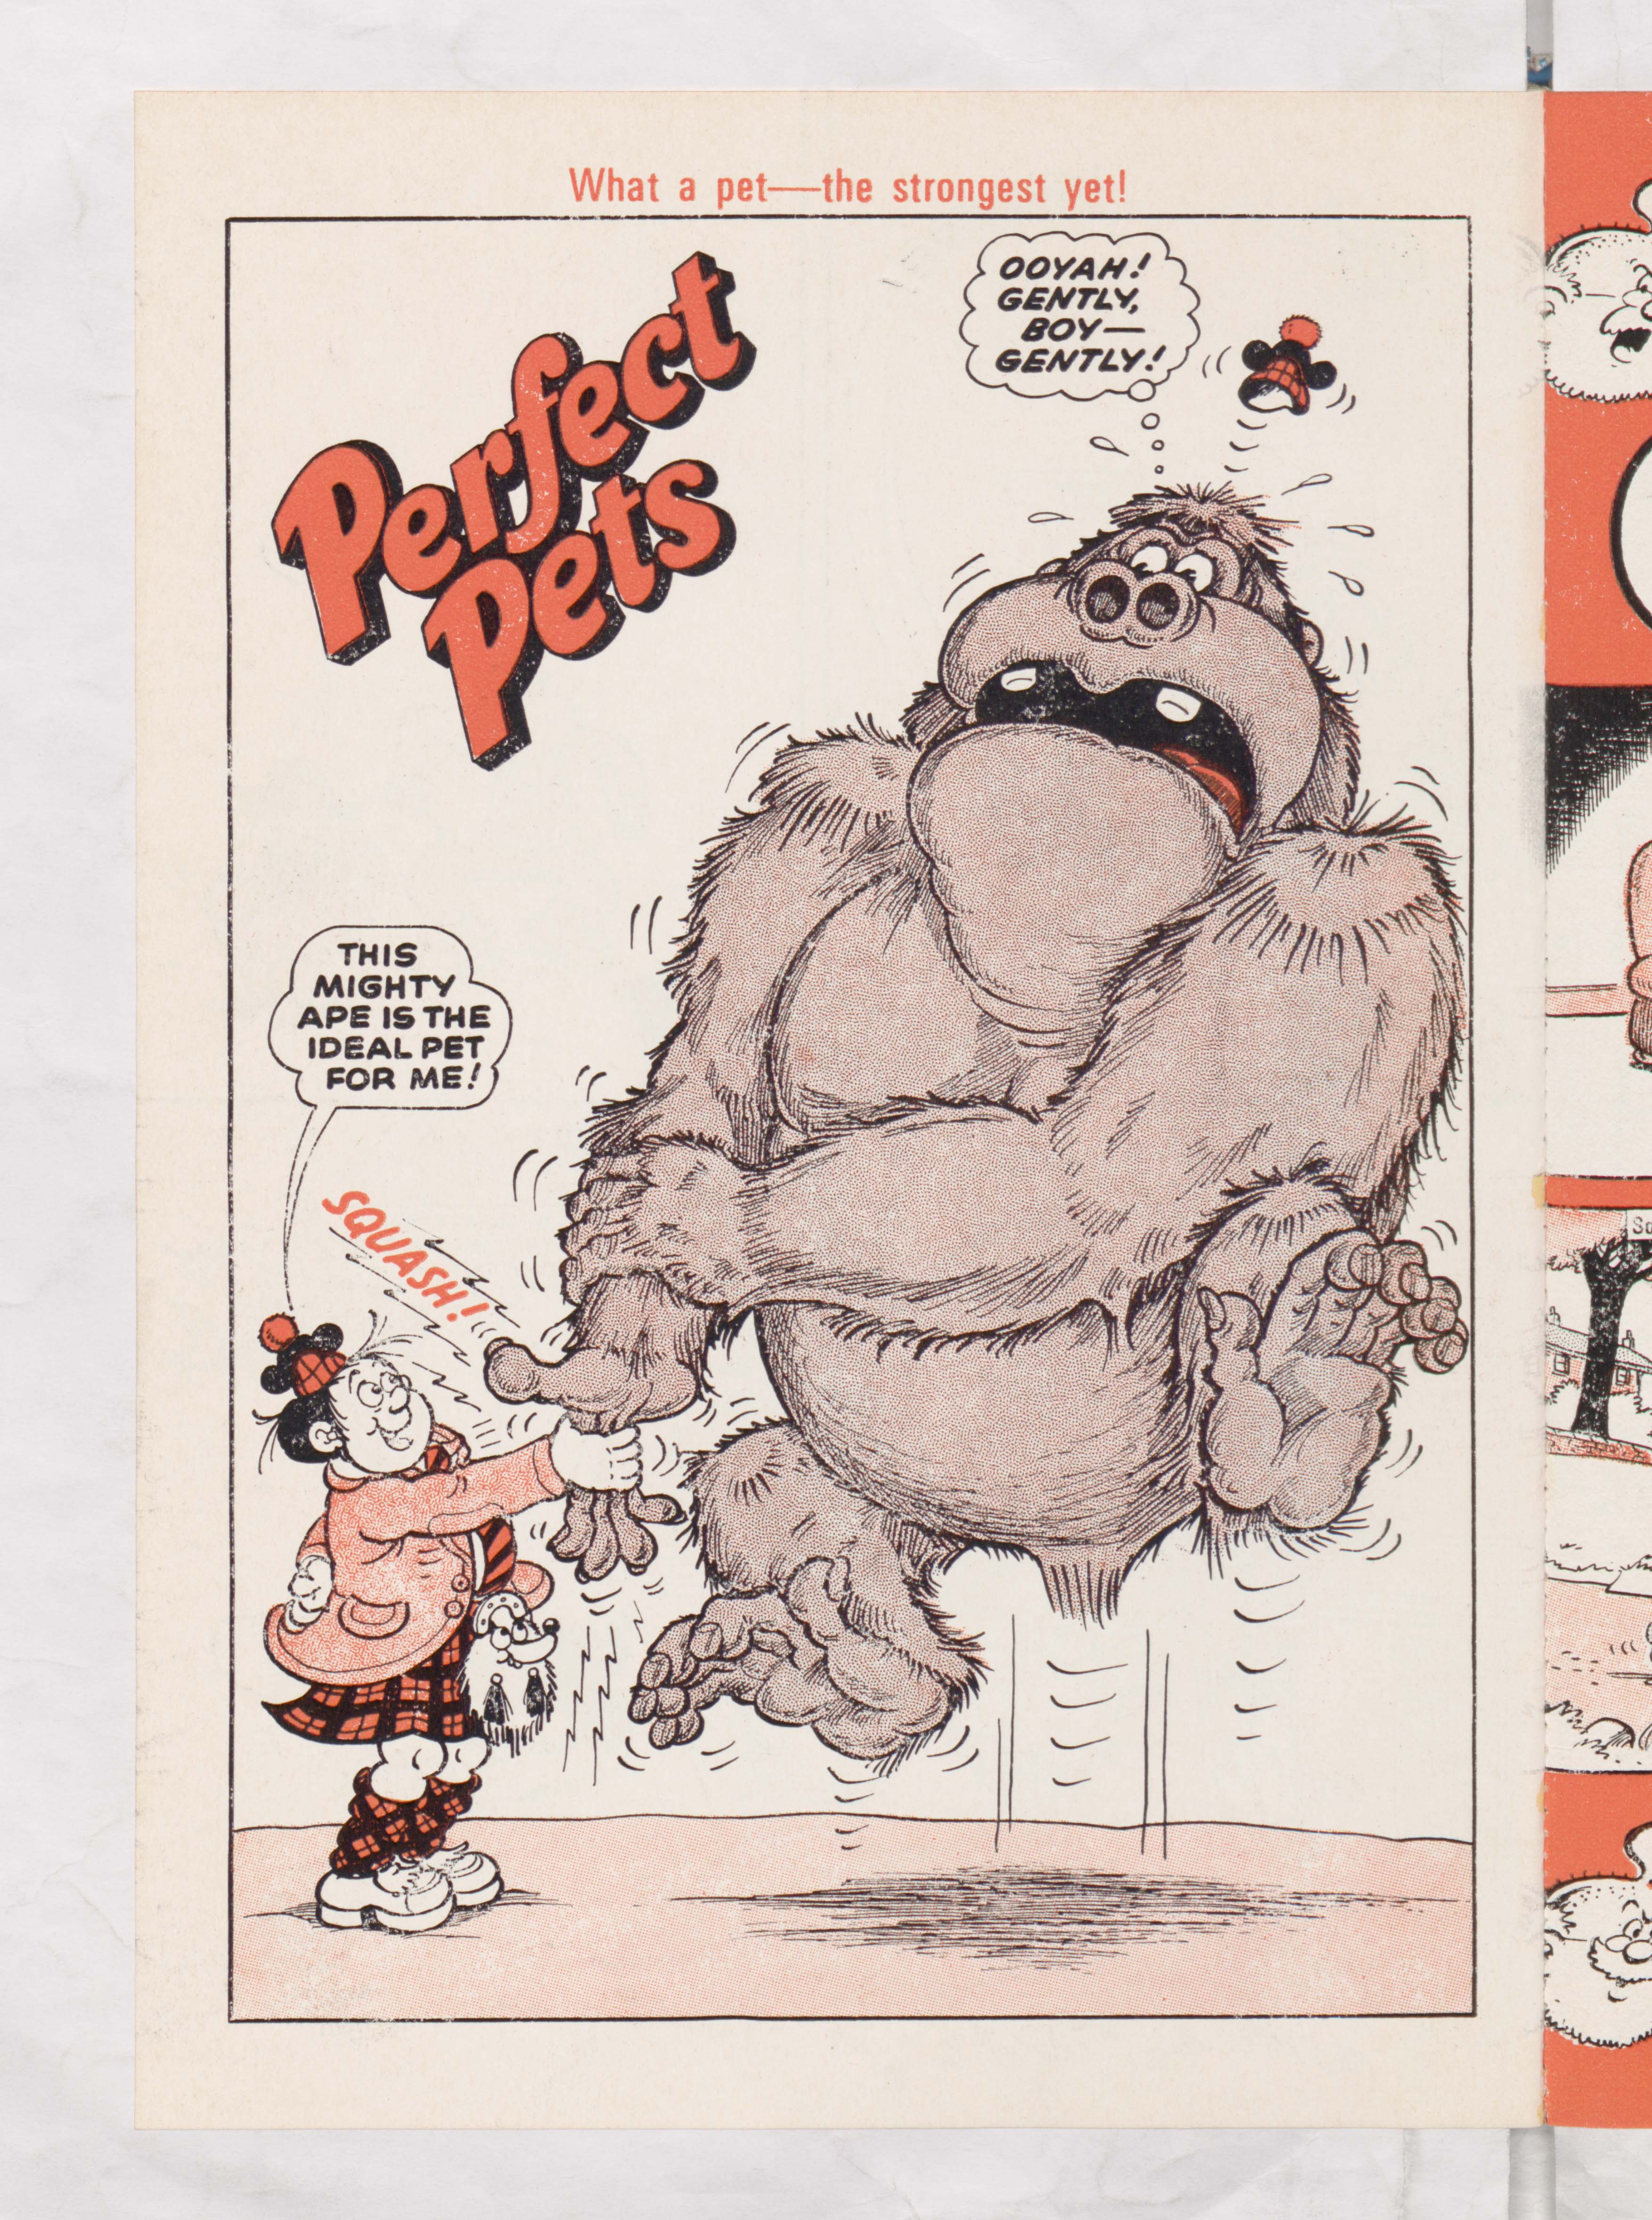 Perfect Pets - Wee Ben Nevis - Page 2 - Beano Annual 1979